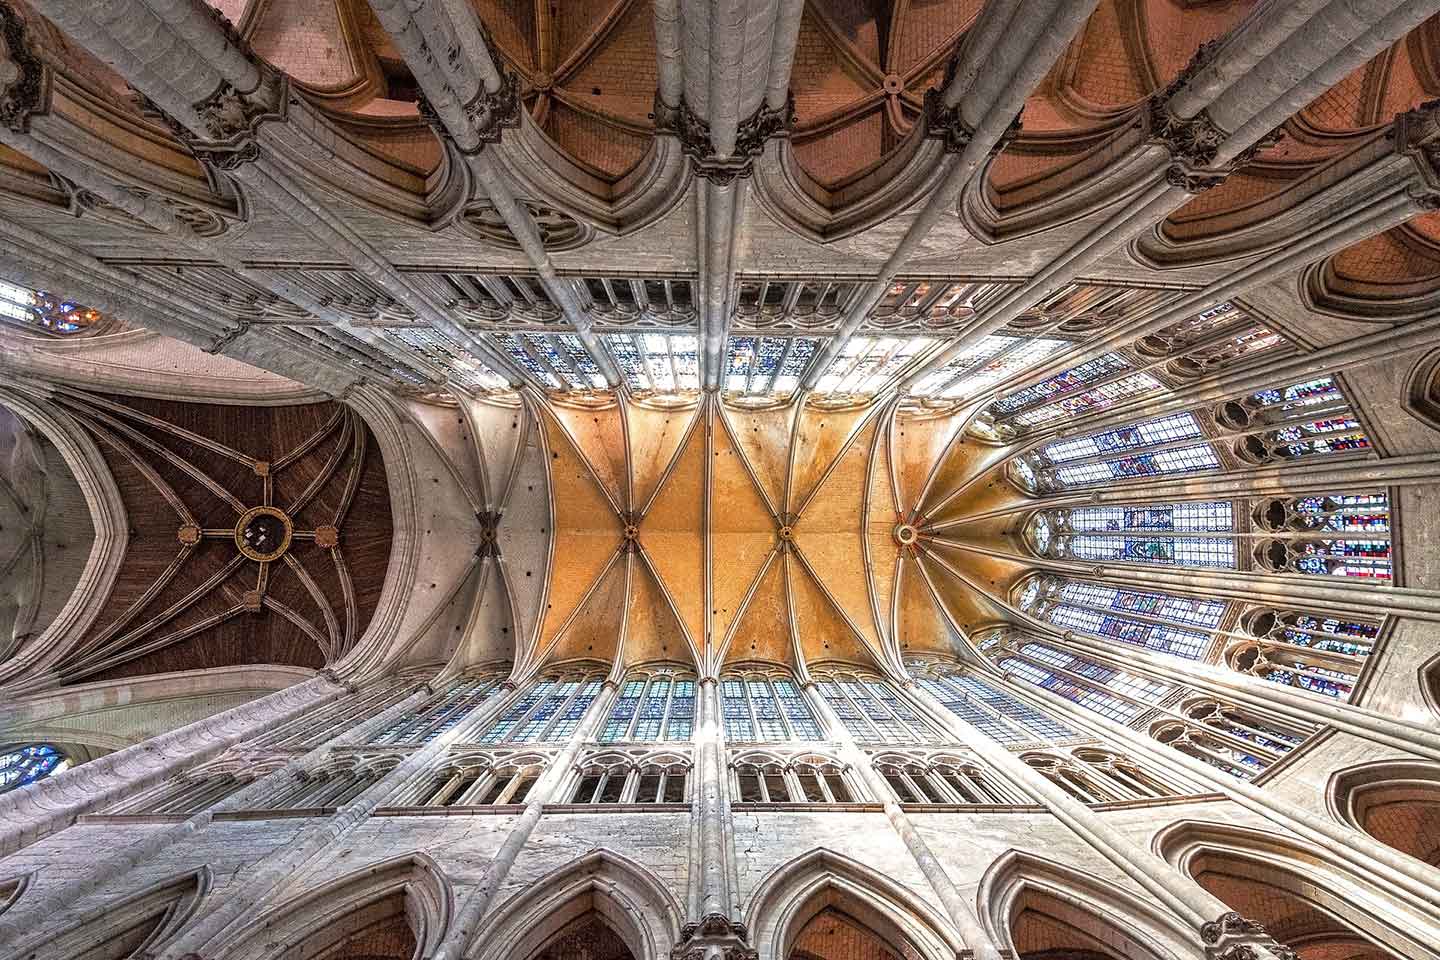 Image of the high Gothic vaulting in Beauvais Cathedral Oise France